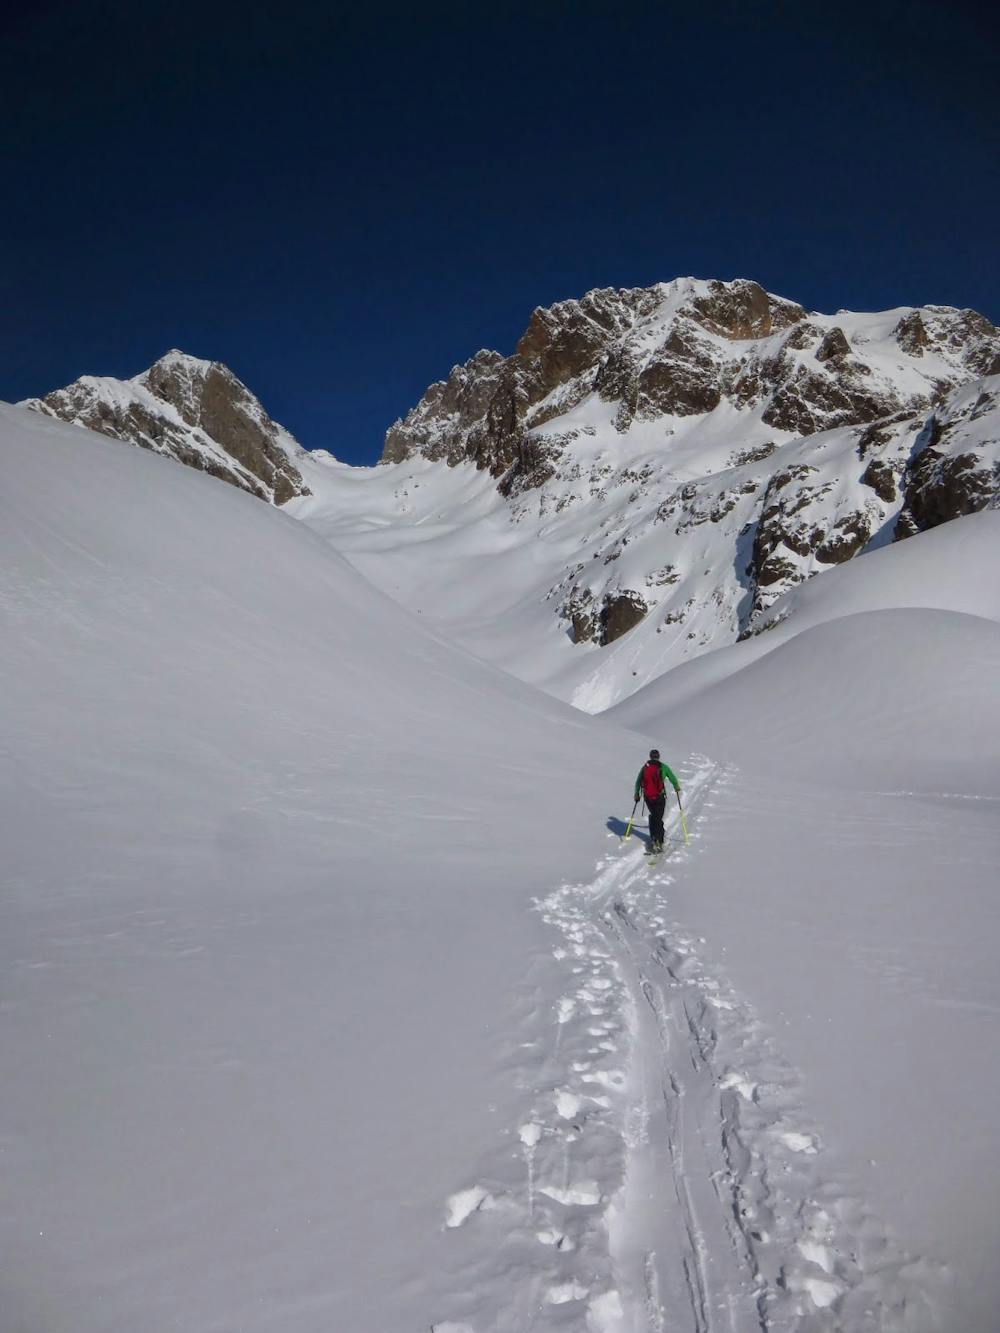 Skinning across Lac Blanc with the Col clearly visible above